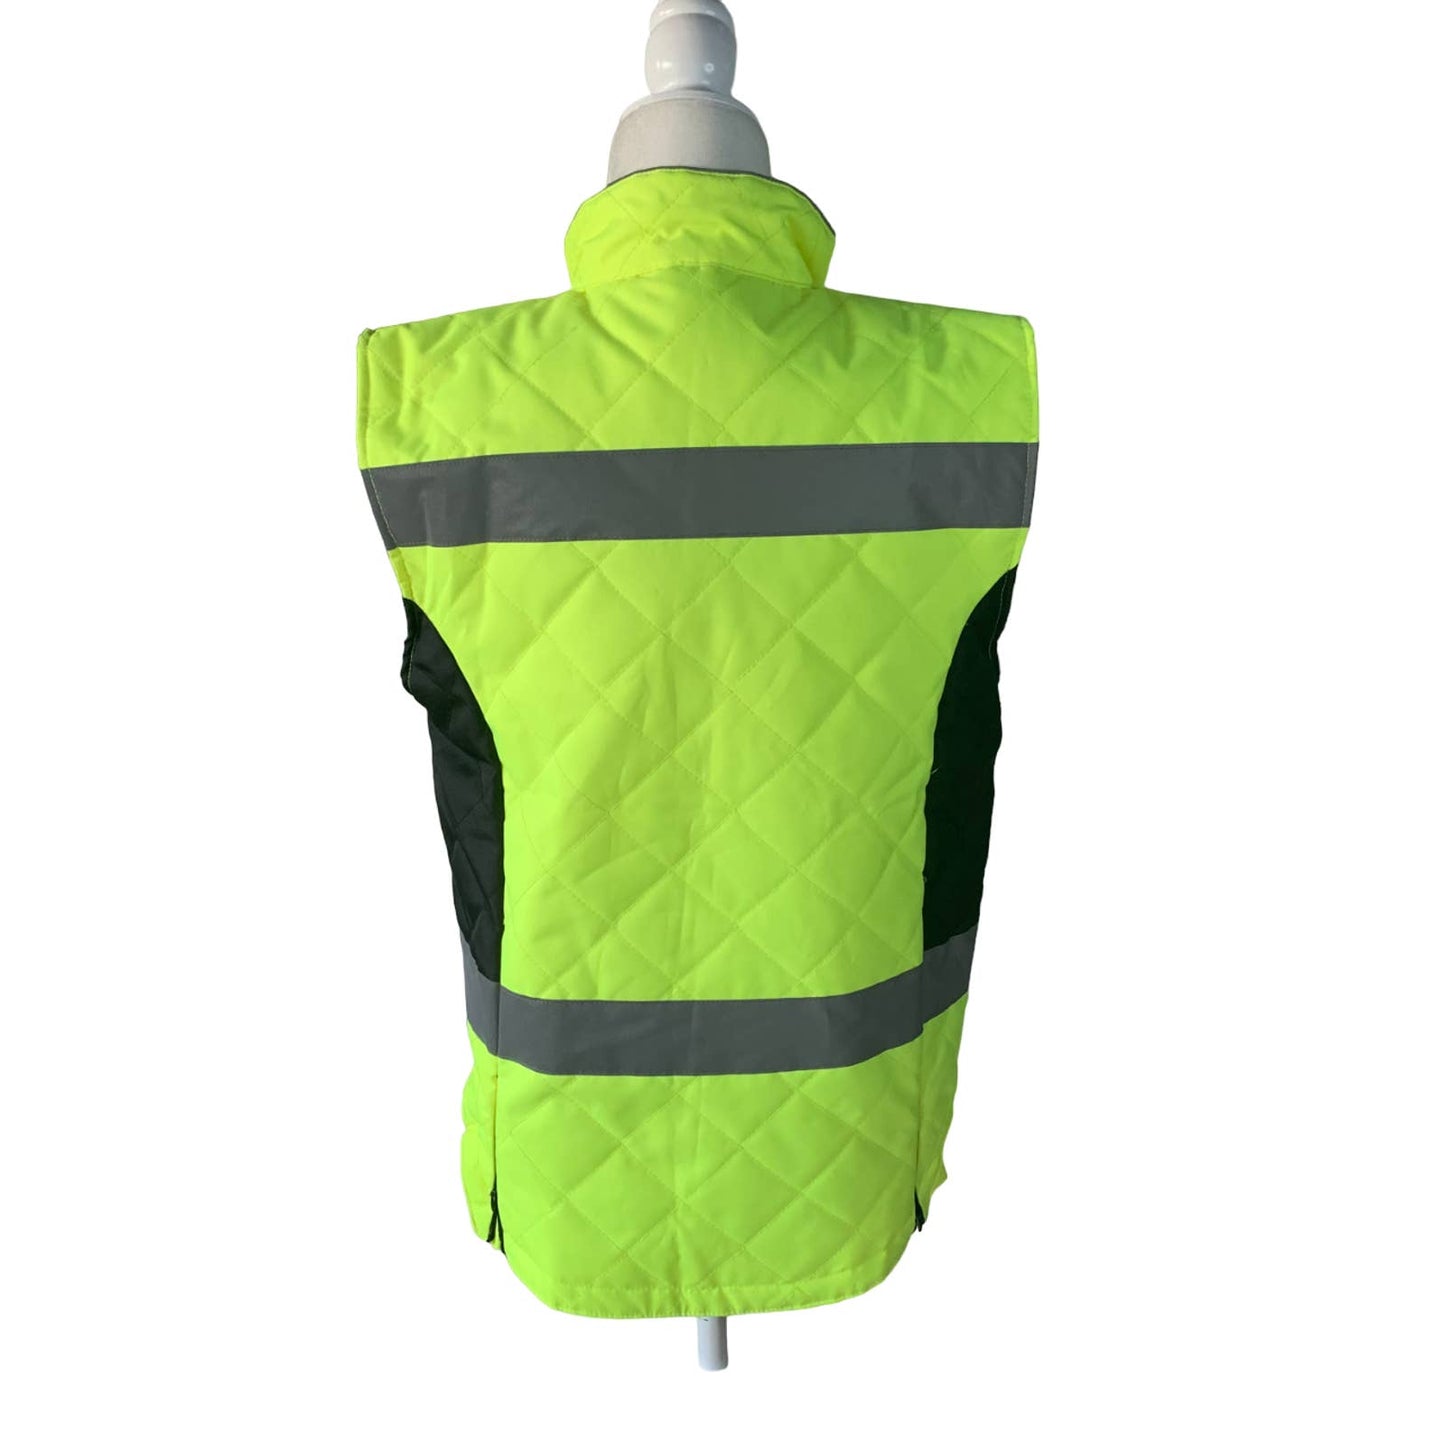 Equisafety Safety Riding Vest in Yellow - Woman's Medium